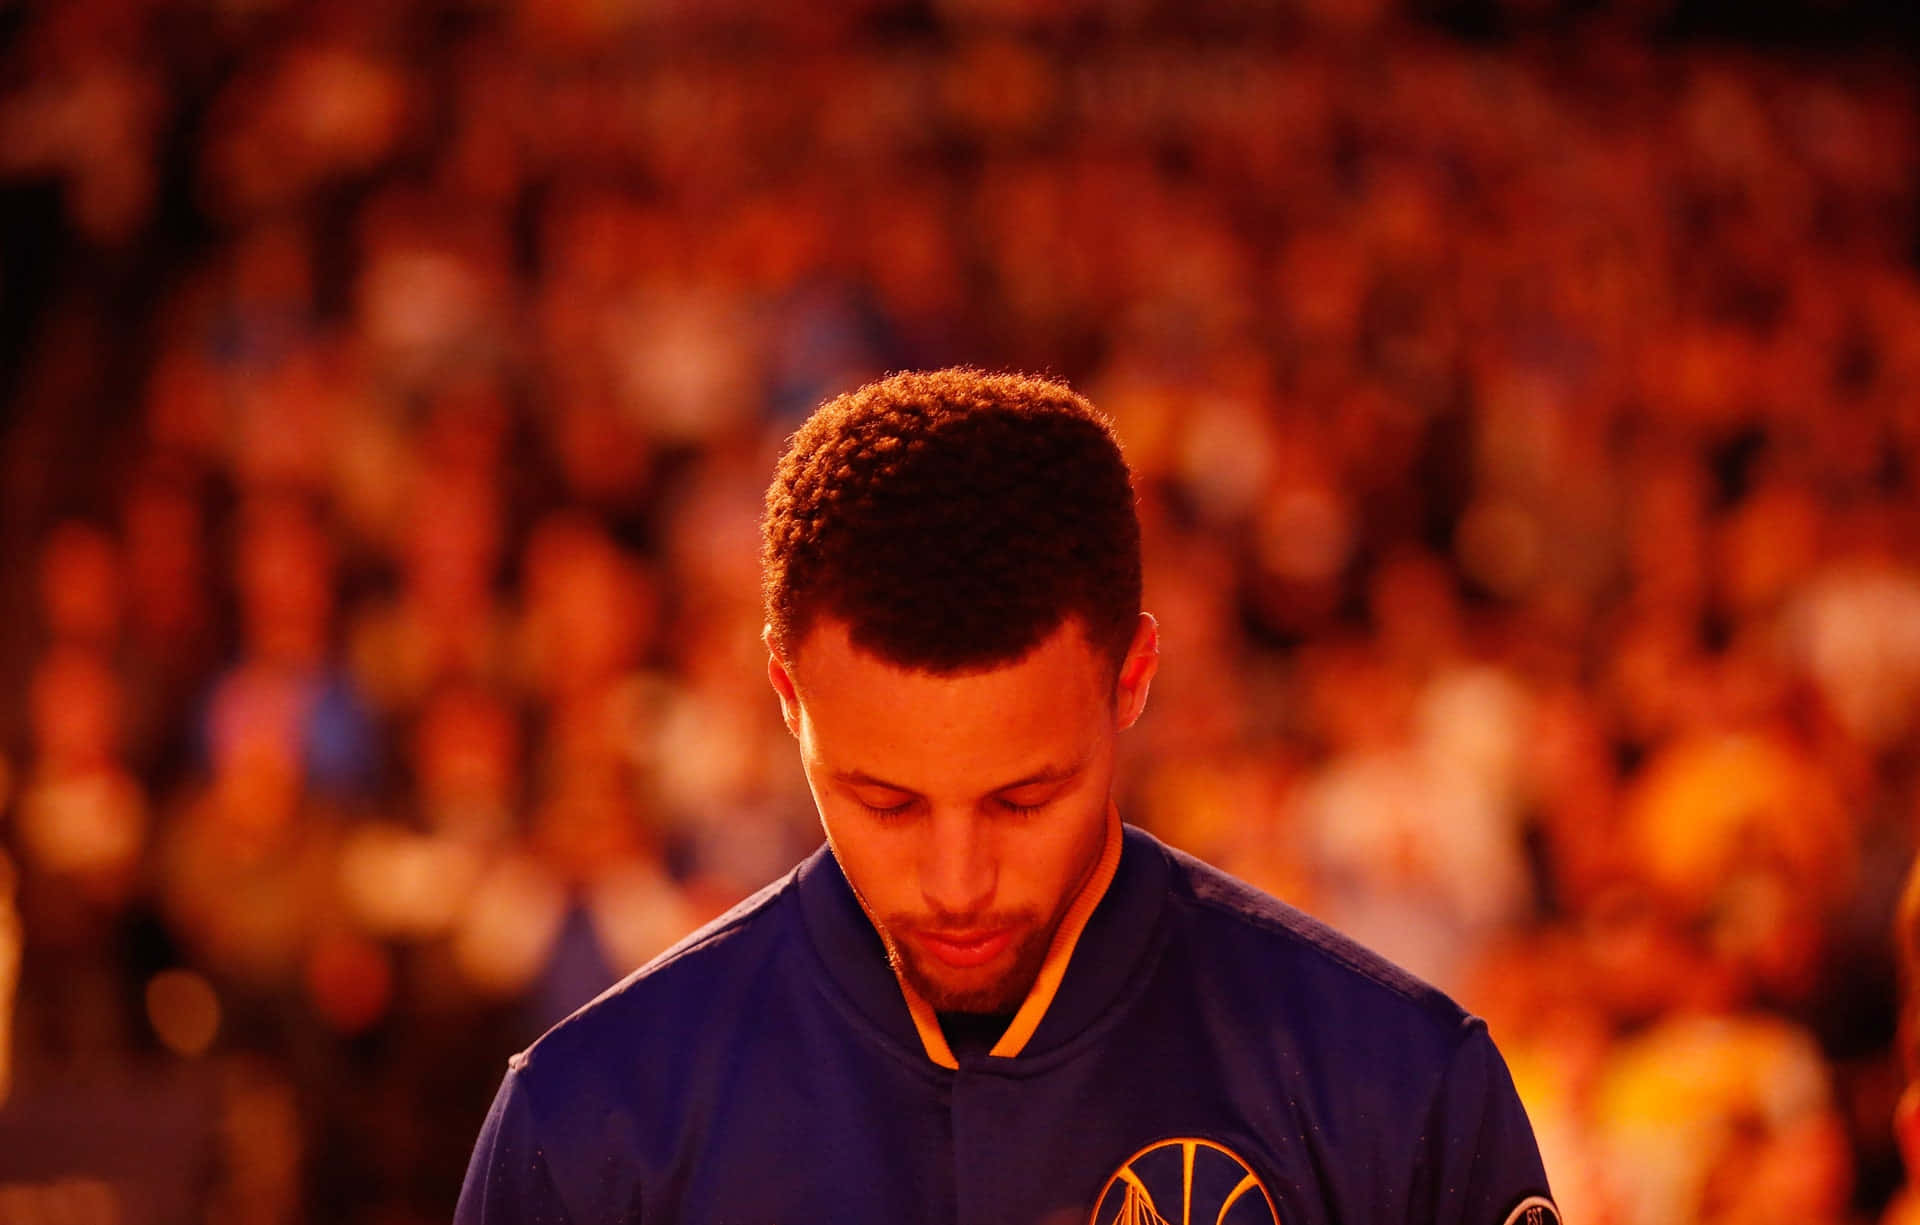 Steph Curry in action on the basketball court